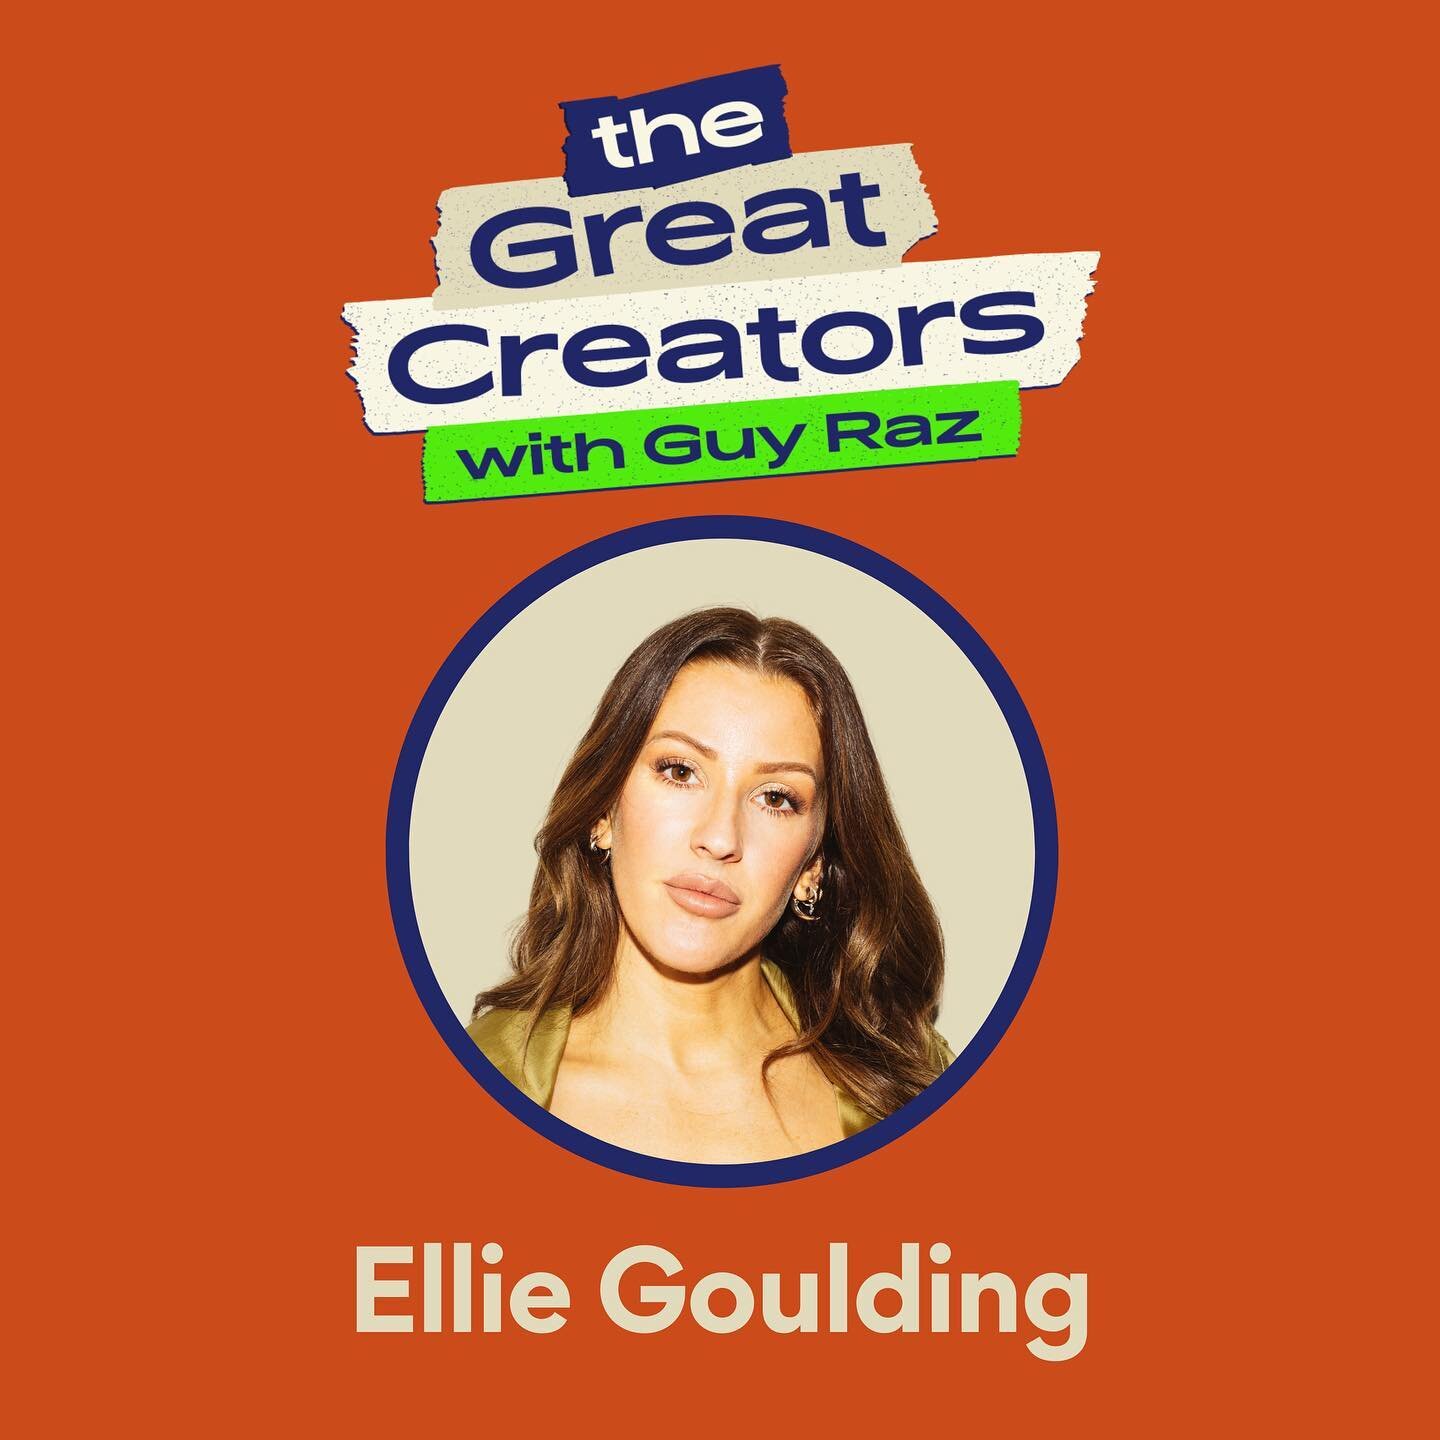 Tomorrow, @elliegoulding joins @guy.raz on #TheGreatCreators! Tune in to find out what &ldquo;saved&rdquo; her as a child and when she performed in front of people for the first time. 

#higherthanheaven #singersongwriter #lovemelikeyoudo #podcast